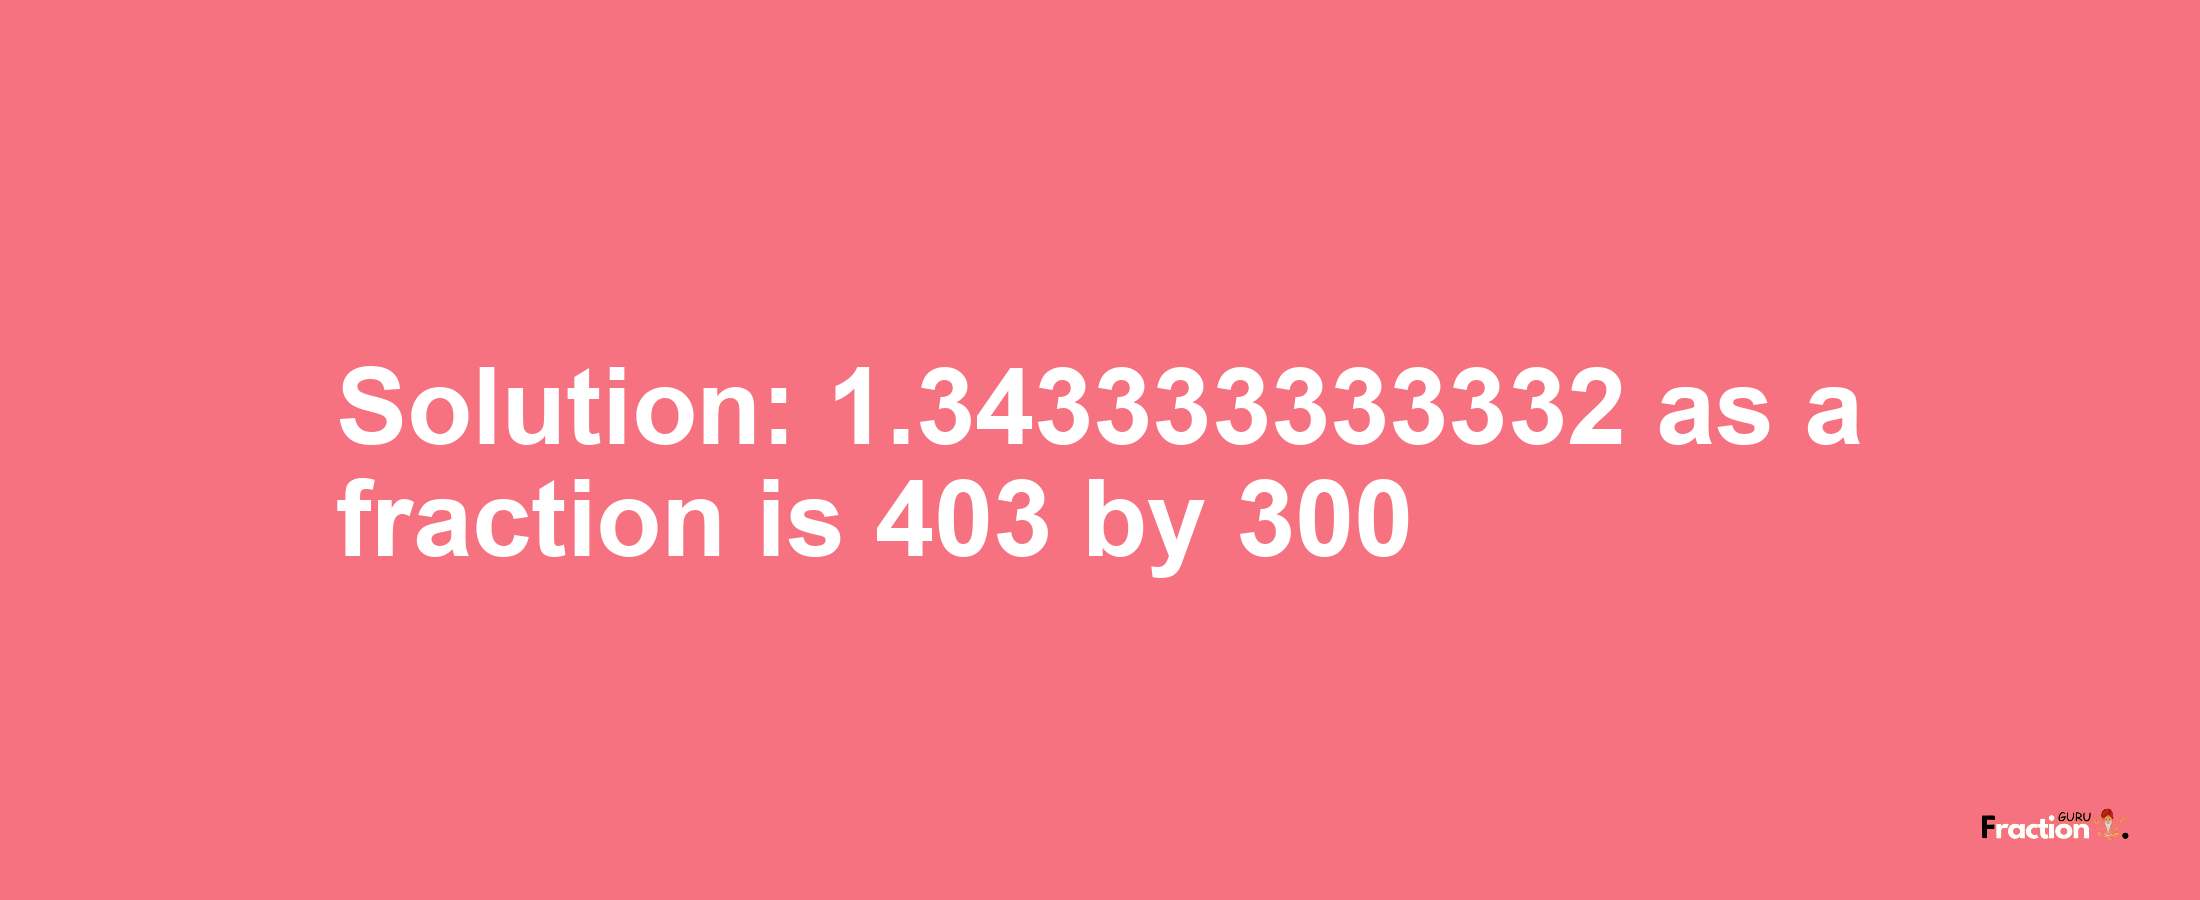 Solution:1.343333333332 as a fraction is 403/300